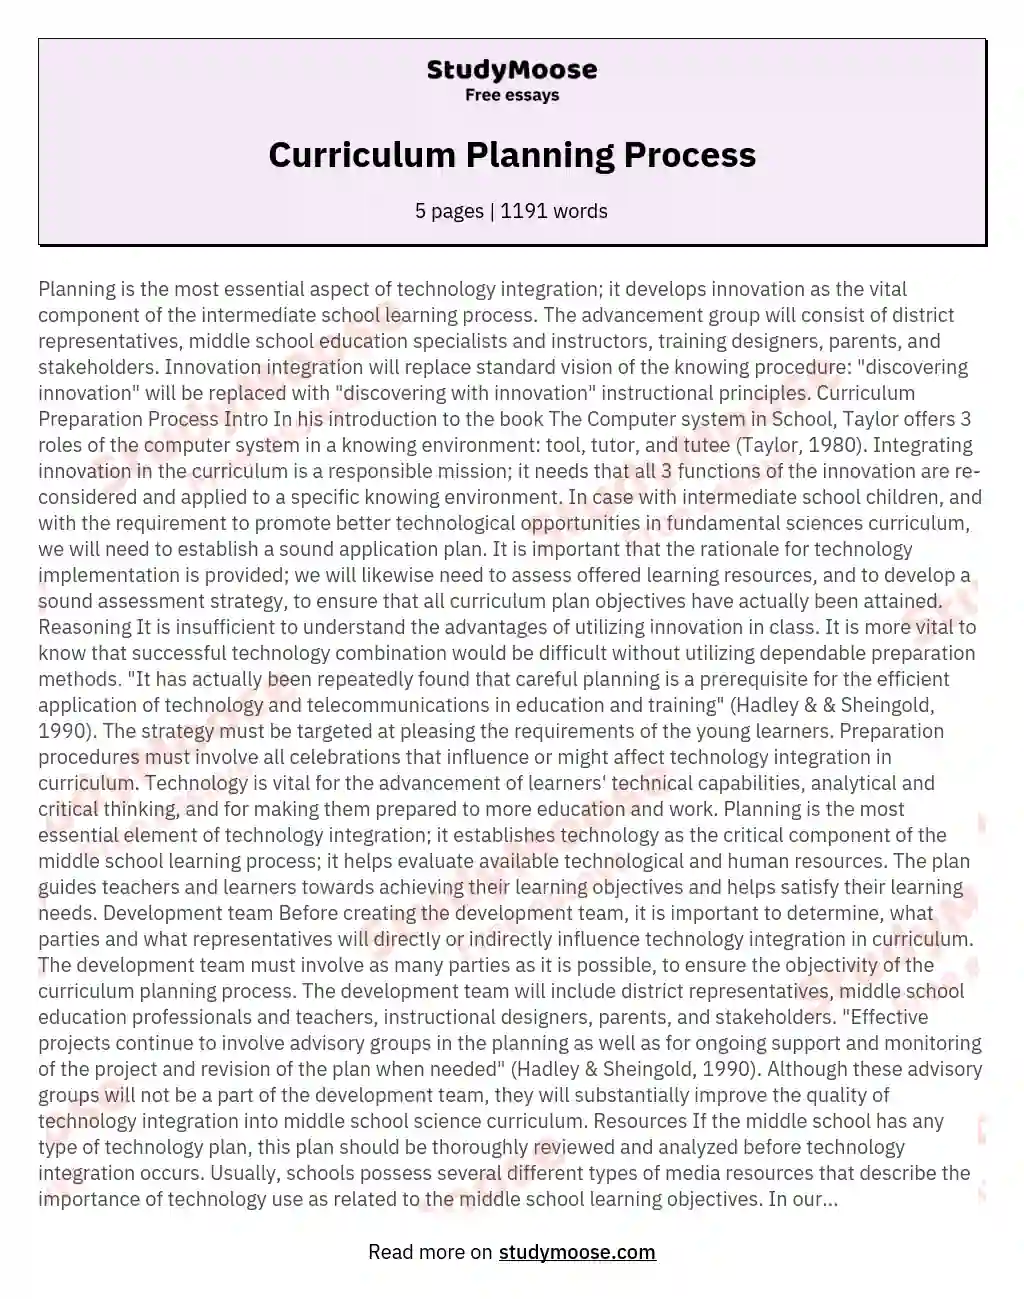 what is educational planning essay